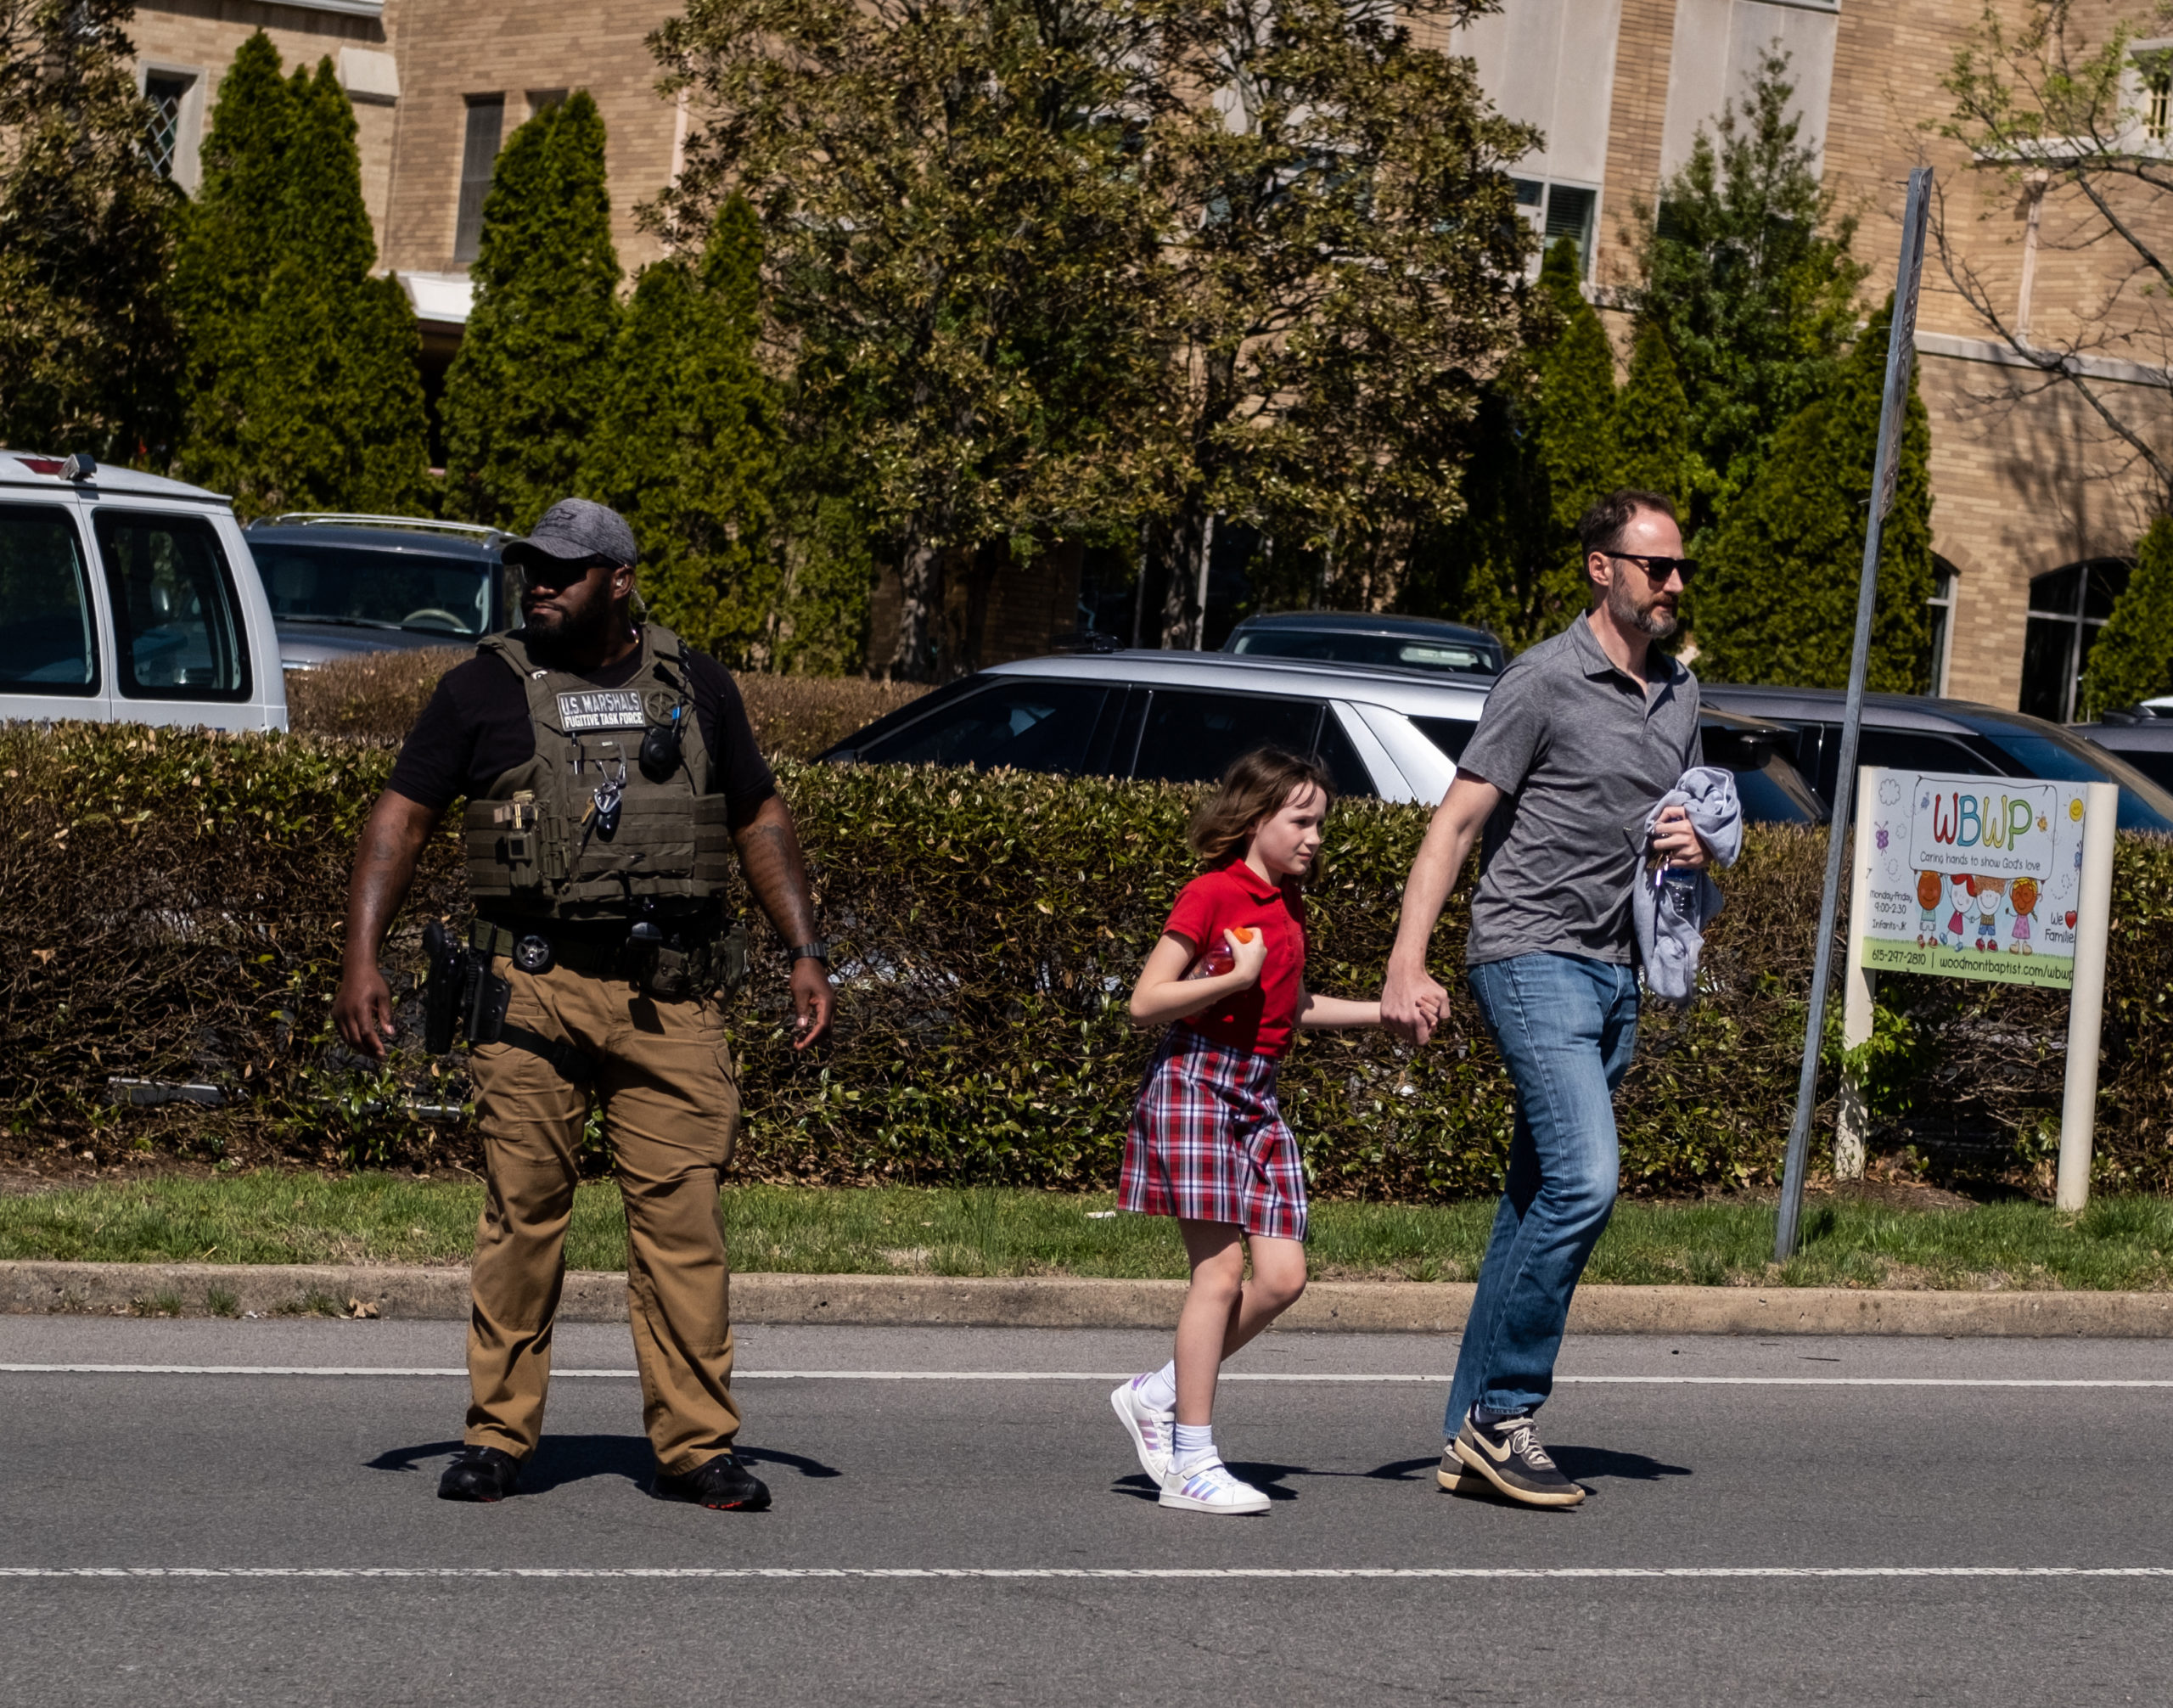 A parent walks with their child from Woodmont Baptist Church where children were reunited with their families after a mass shooting at The Covenant School on March 27, 2023 in Nashville, Tennessee. According to initial reports, three students and three adults were killed by the shooter, a 28-year-old woman. The shooter was killed by police responding to the scene. (Photo by Seth Herald/Getty Images)